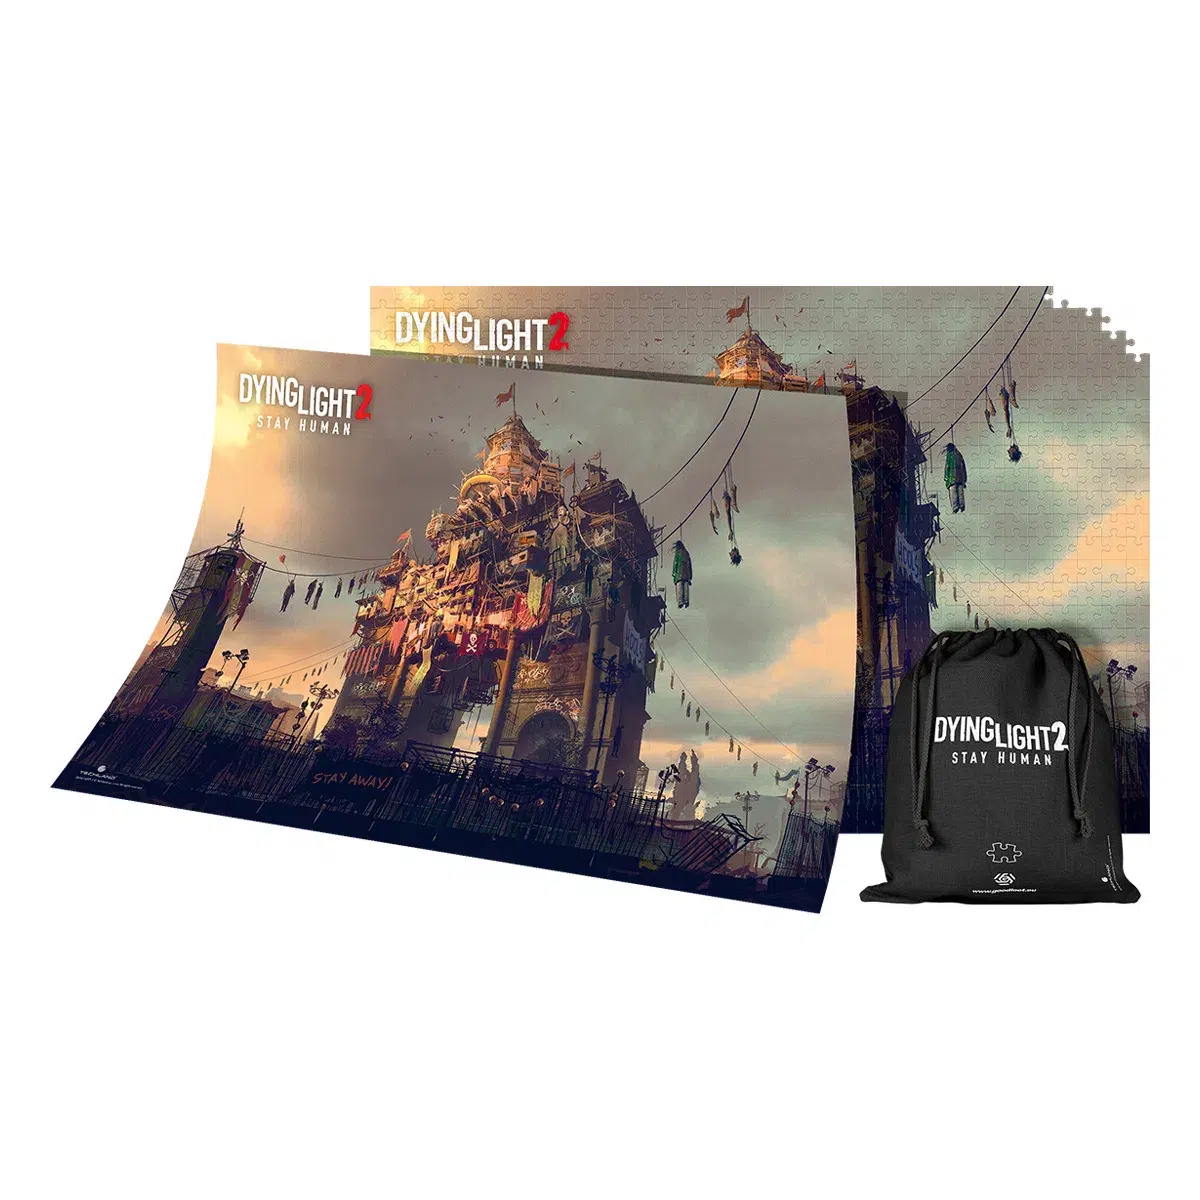 Dying Light 2 Puzzle "Arch" (1000 pcs) Image 2